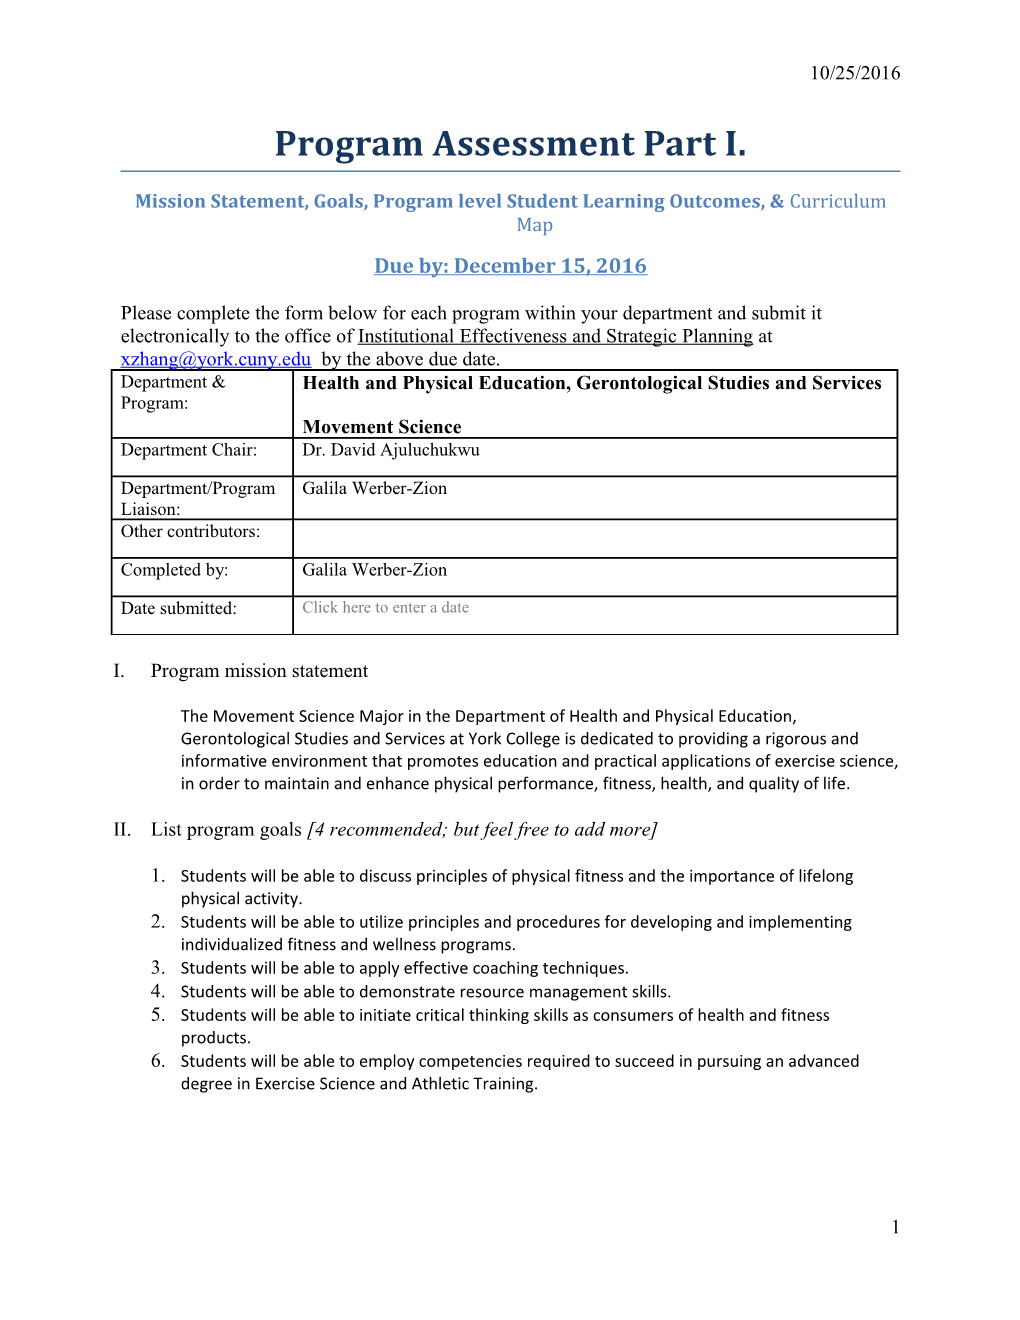 Mission Statement, Goals, Program Level Student Learning Outcomes, & Curriculum Map s1